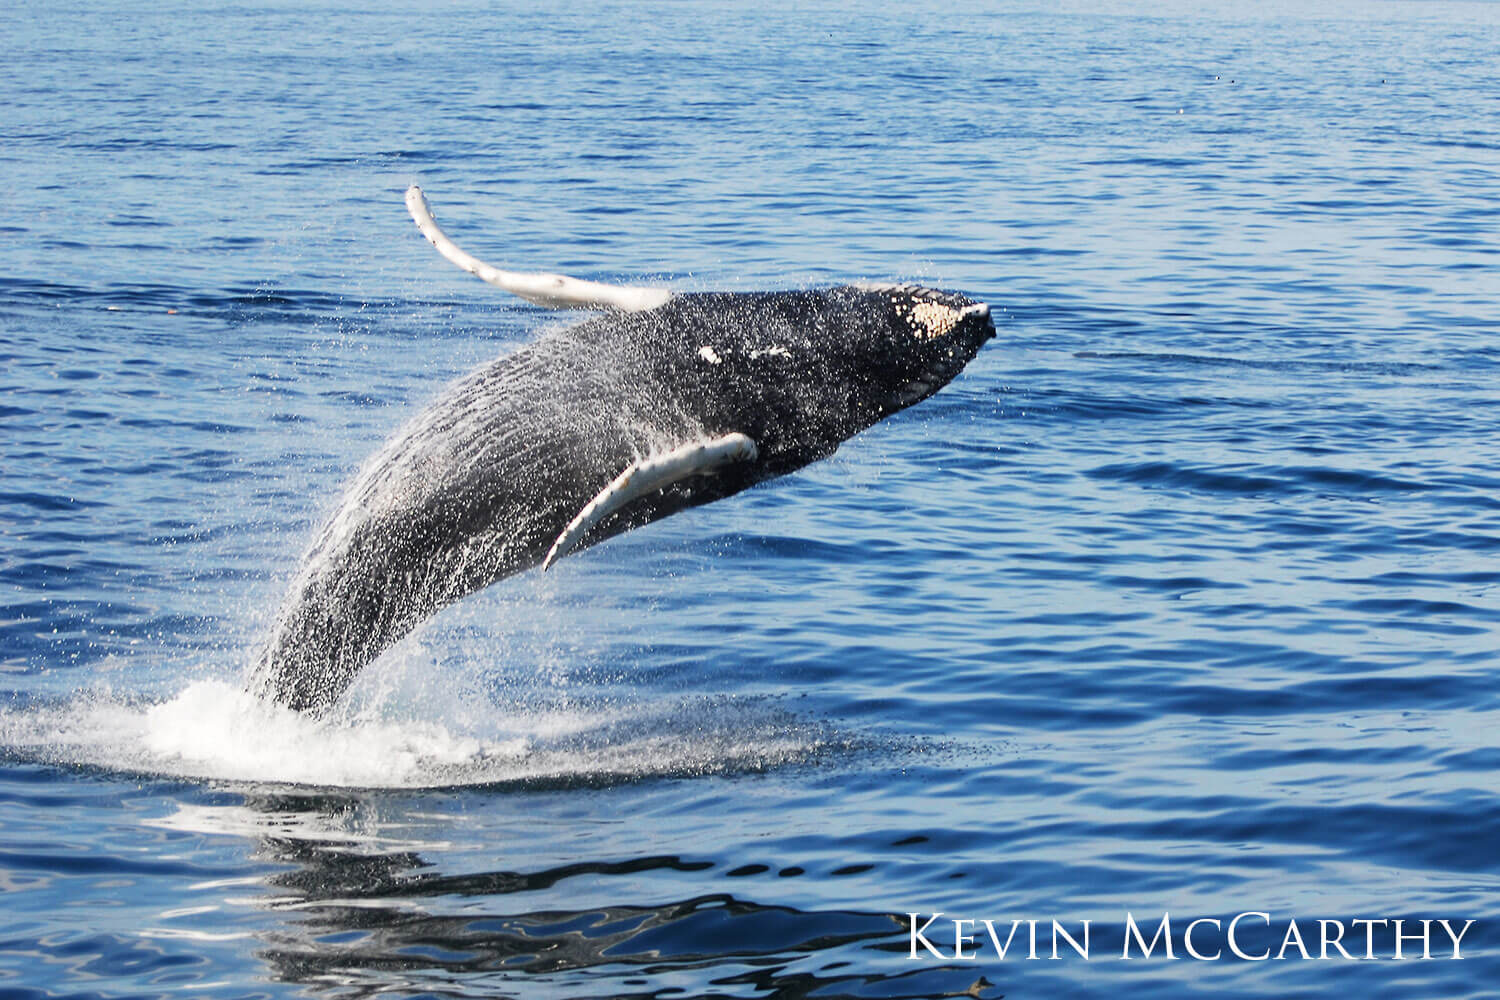 Humpback whale breaching the surface of the water.